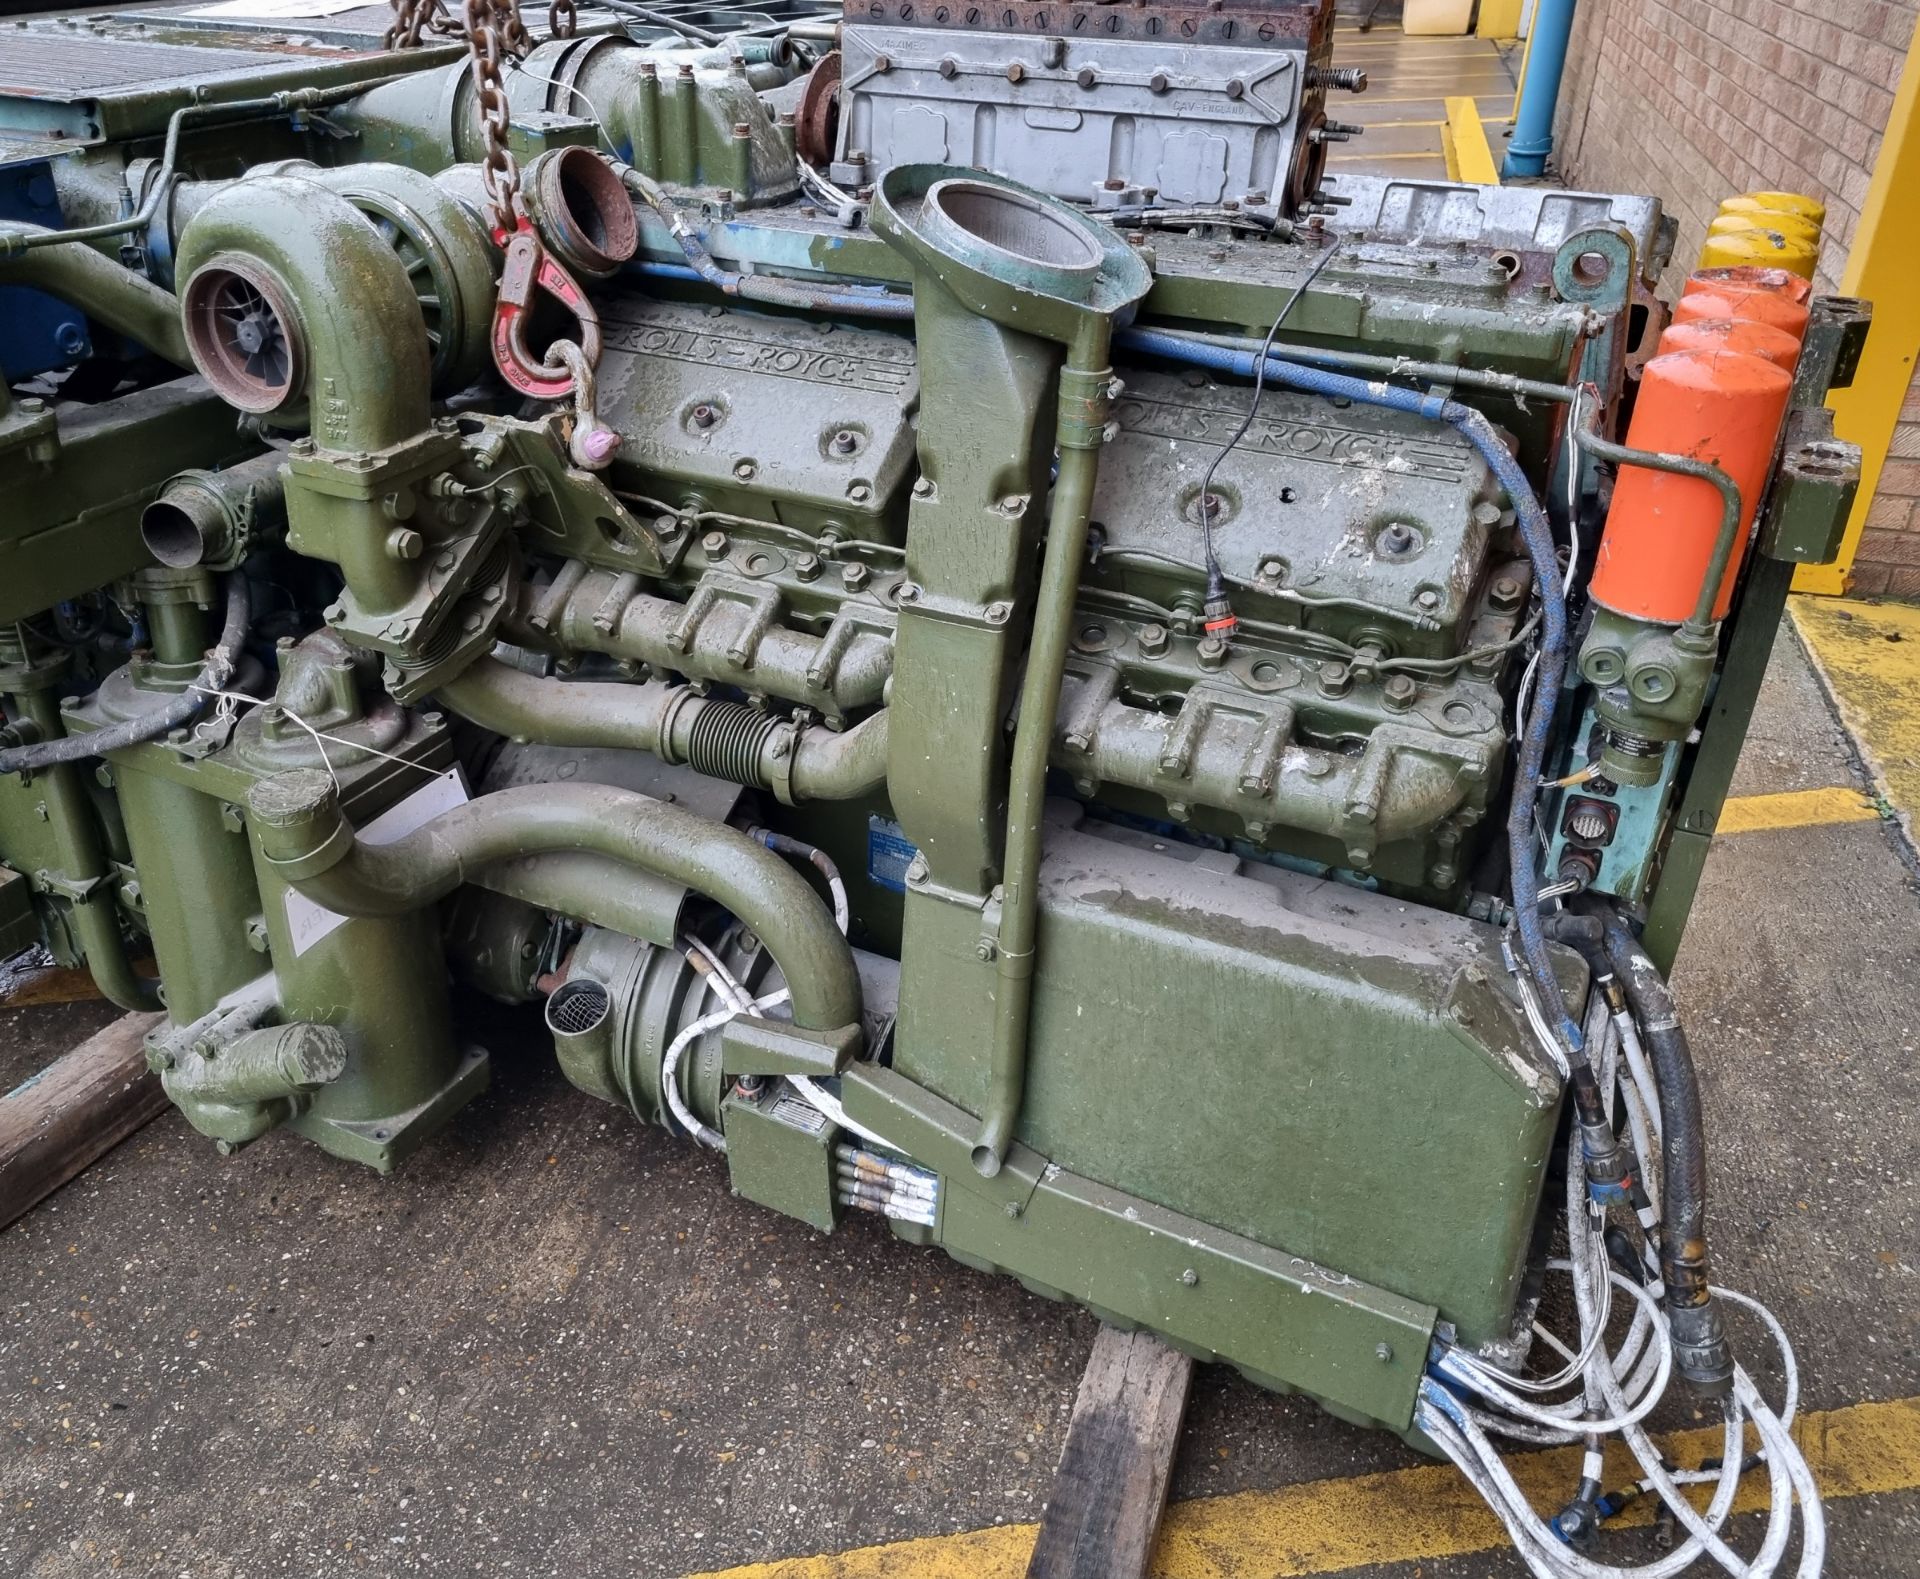 Challenger 2 tank engine Rolls Royce CV12 26 litre twin turbo diesel engine and transmission - Image 7 of 21